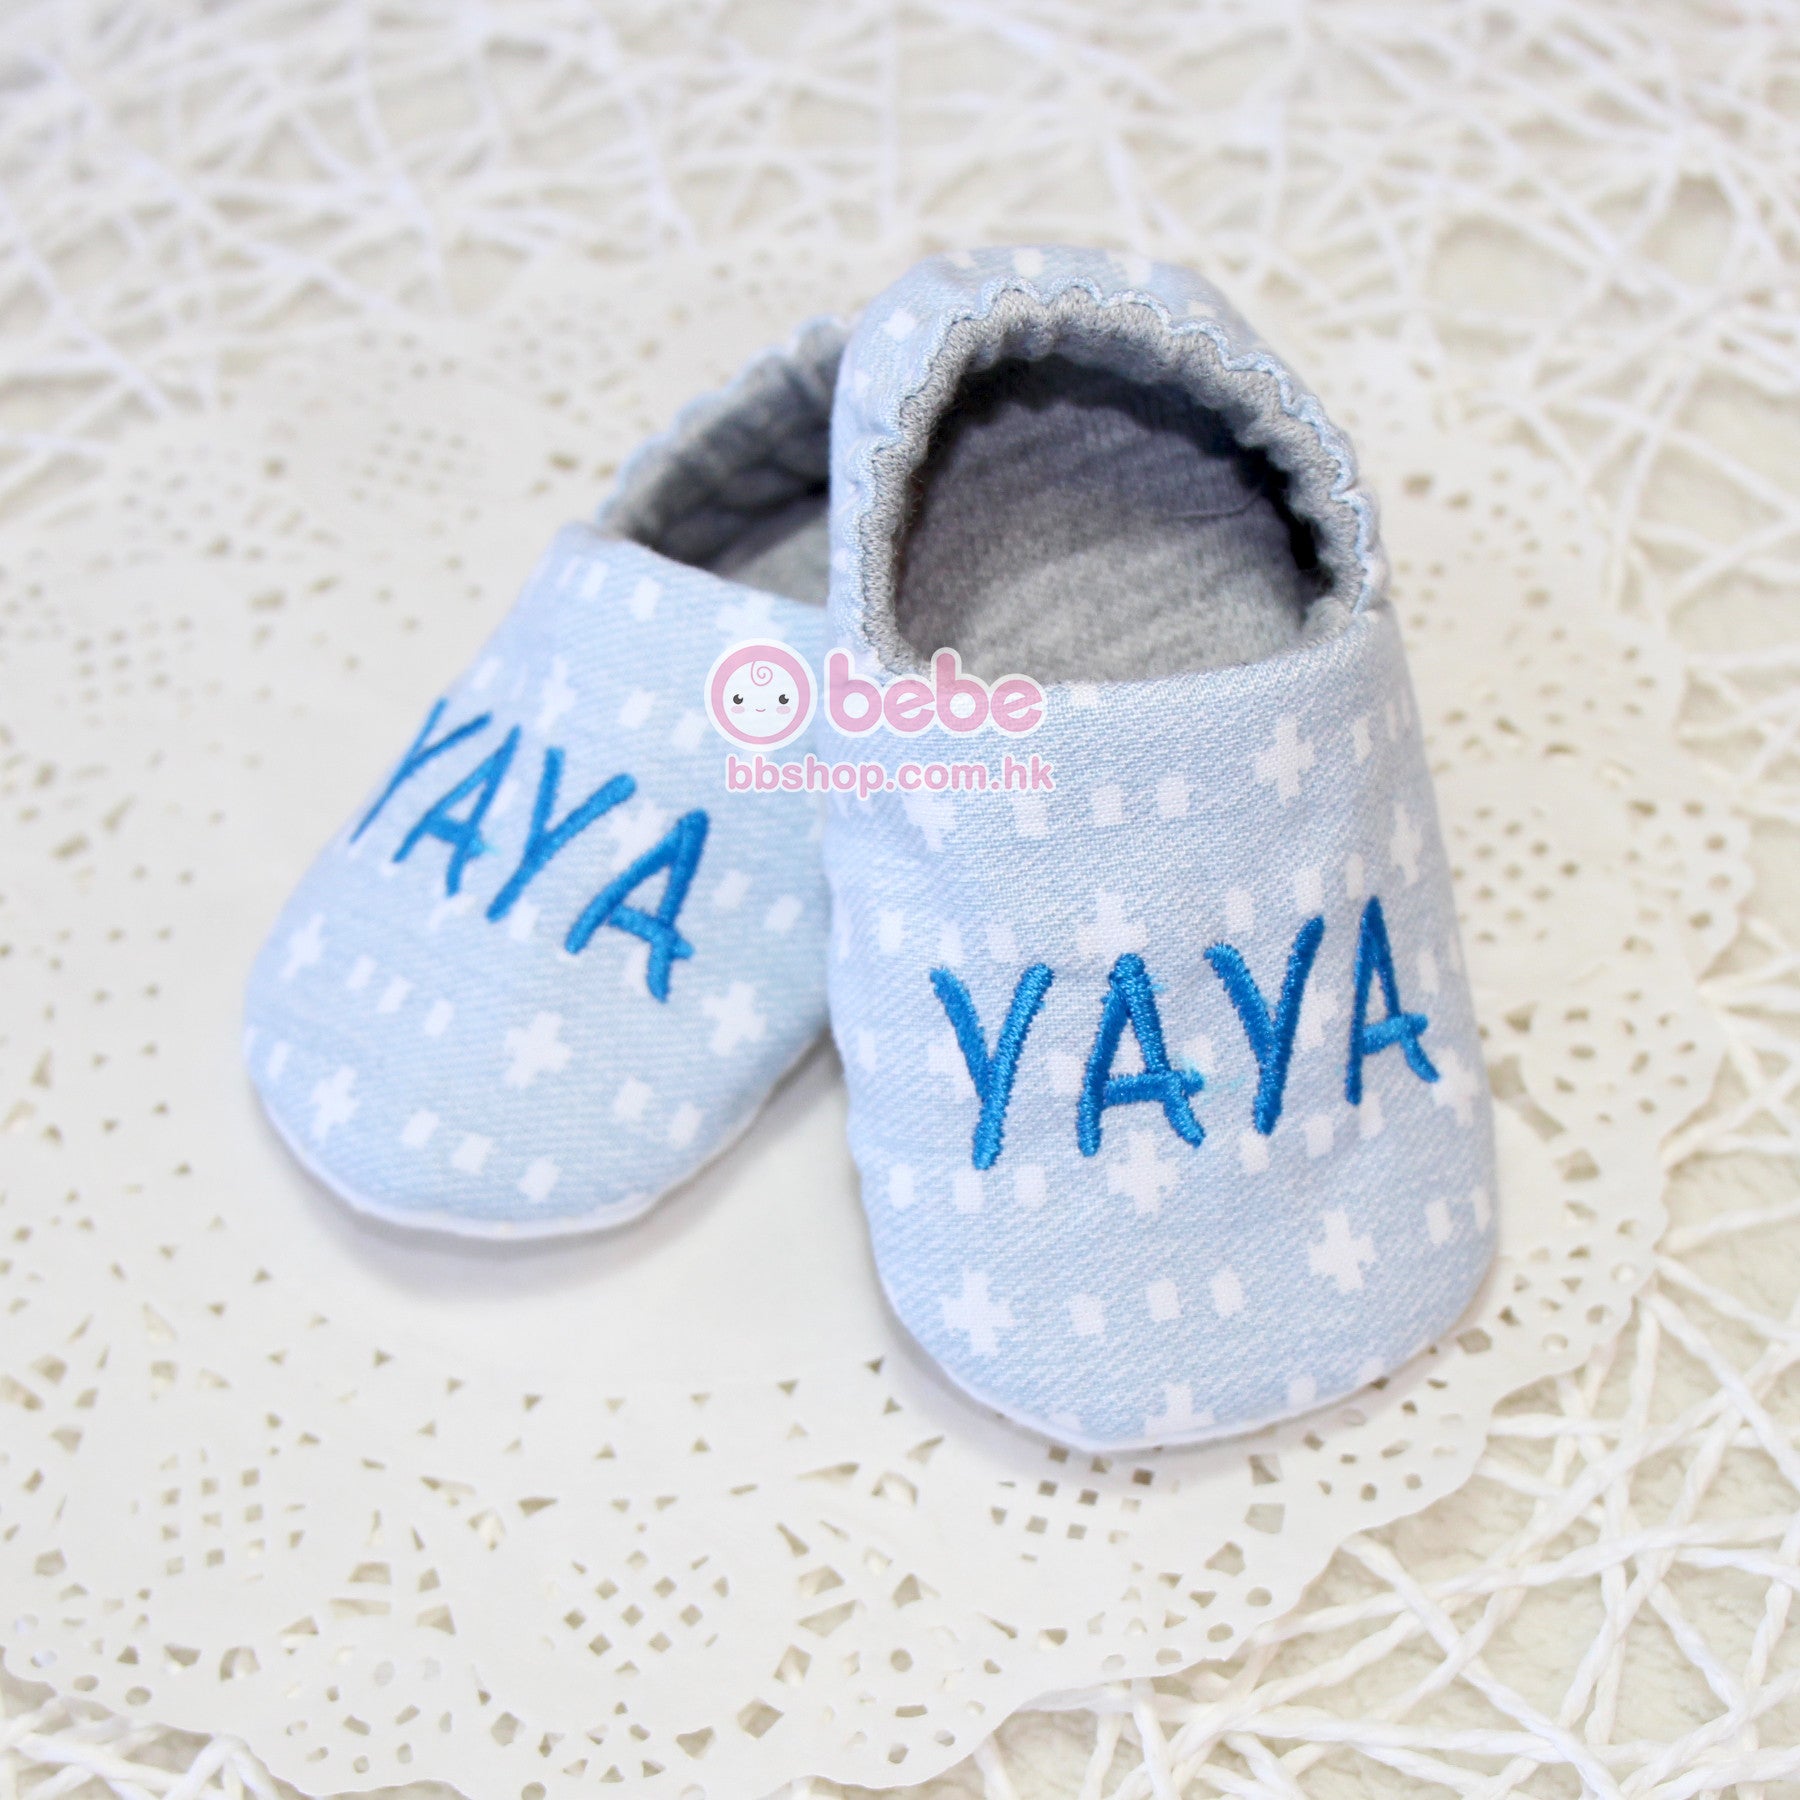 HMS860 自選布料繡名鞋仔 Personalized Baby Shoes (3-10 months)